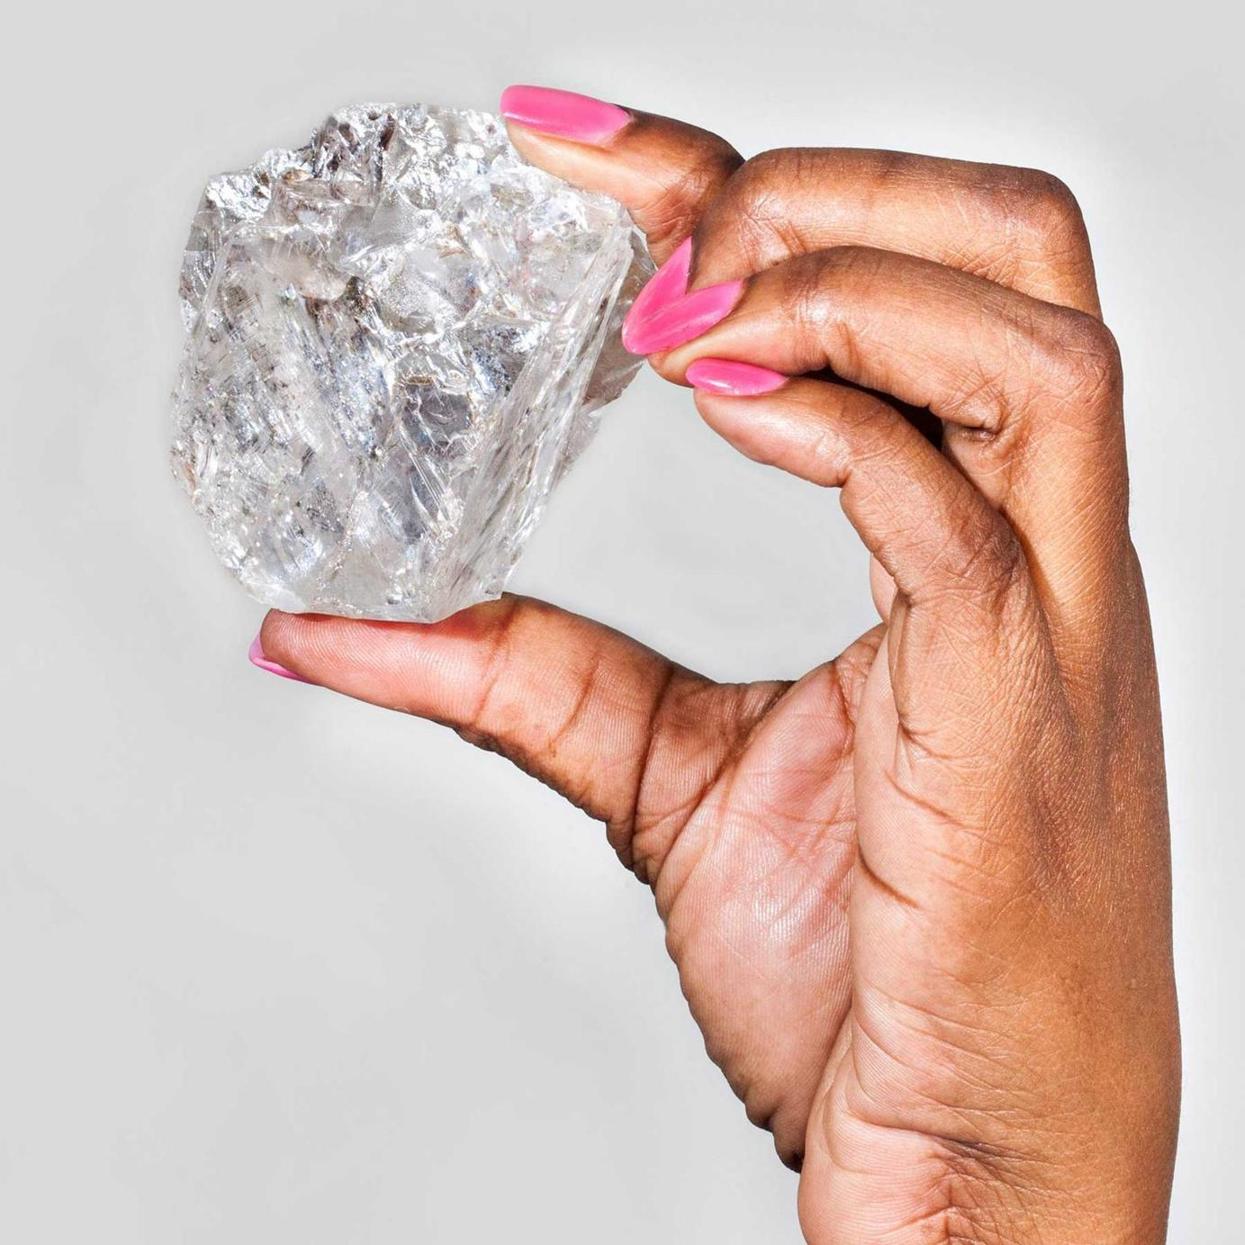 Botswana Diamonds gains 11% as excitement grows for SA prospect Thorny River